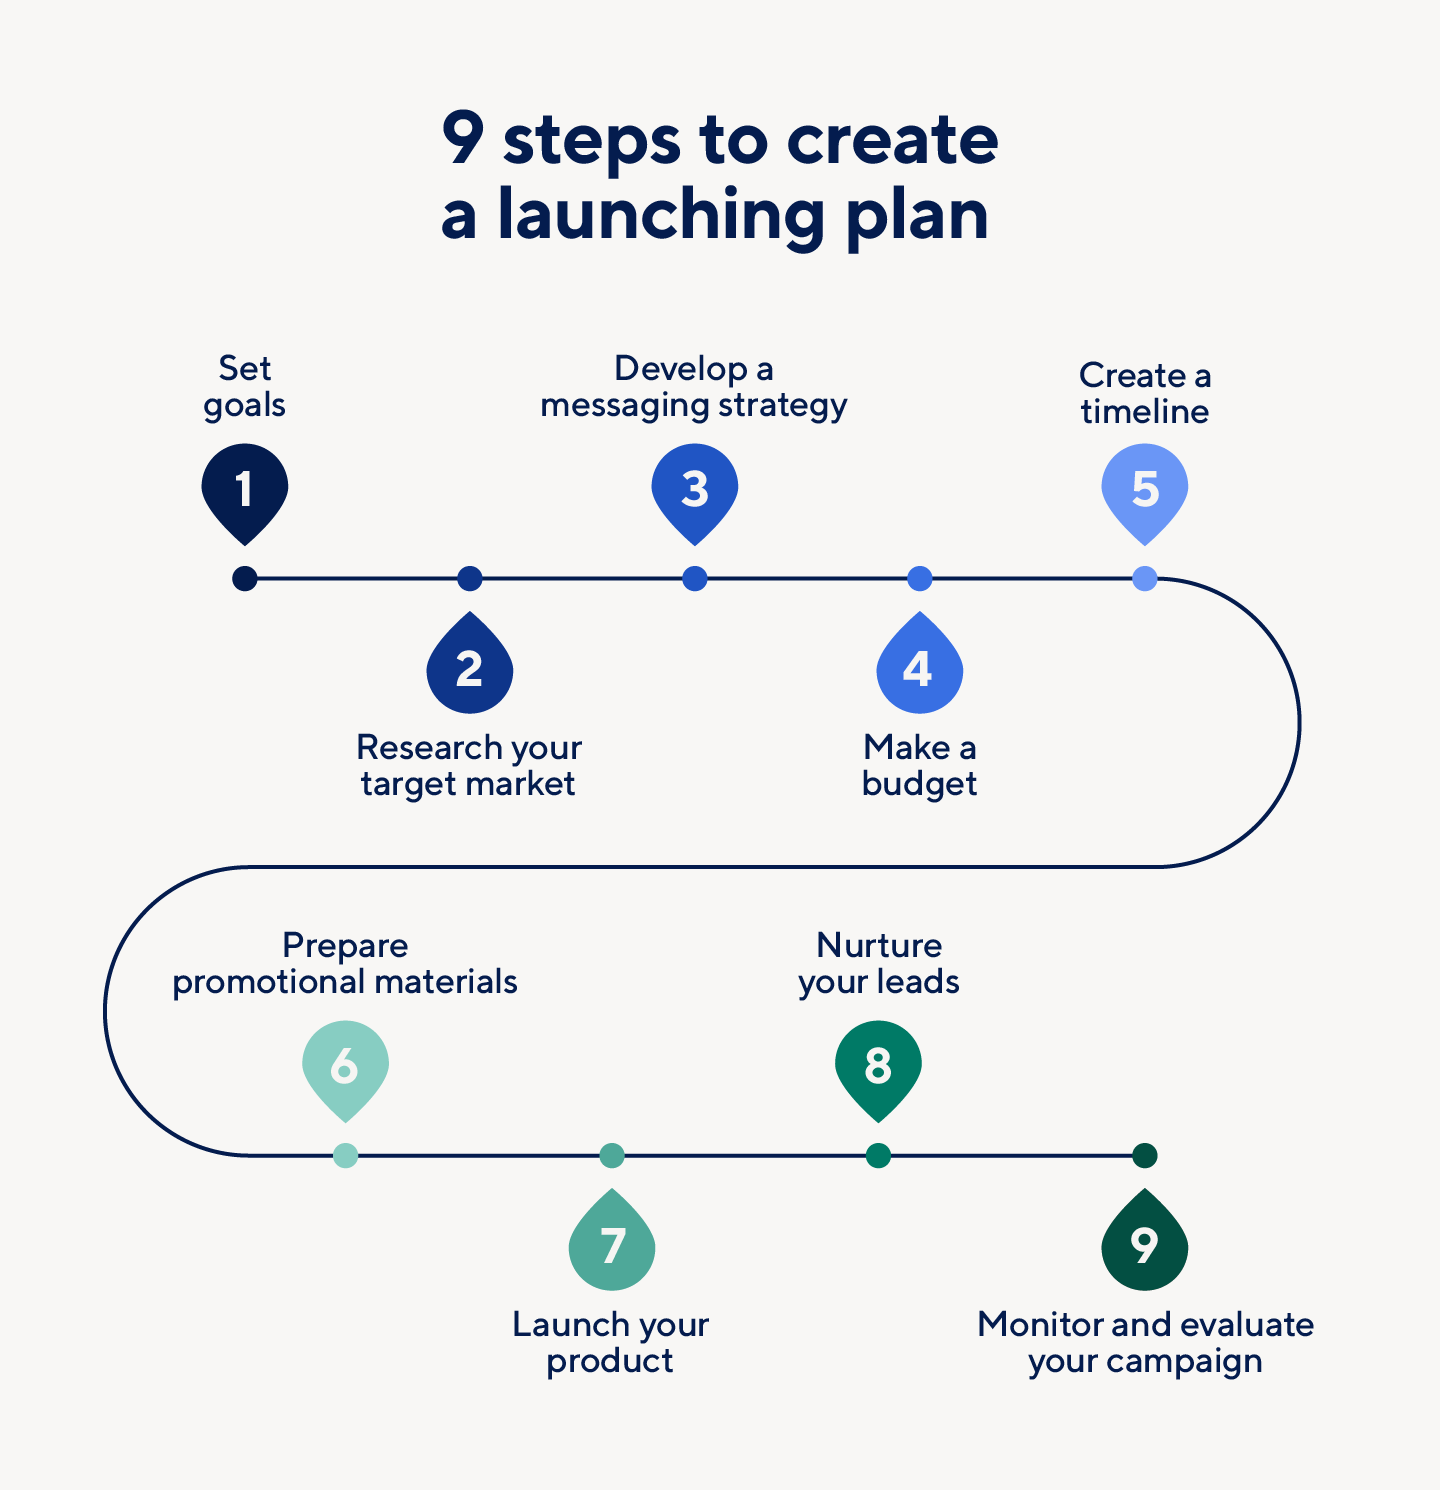 Steps to create a launch plan